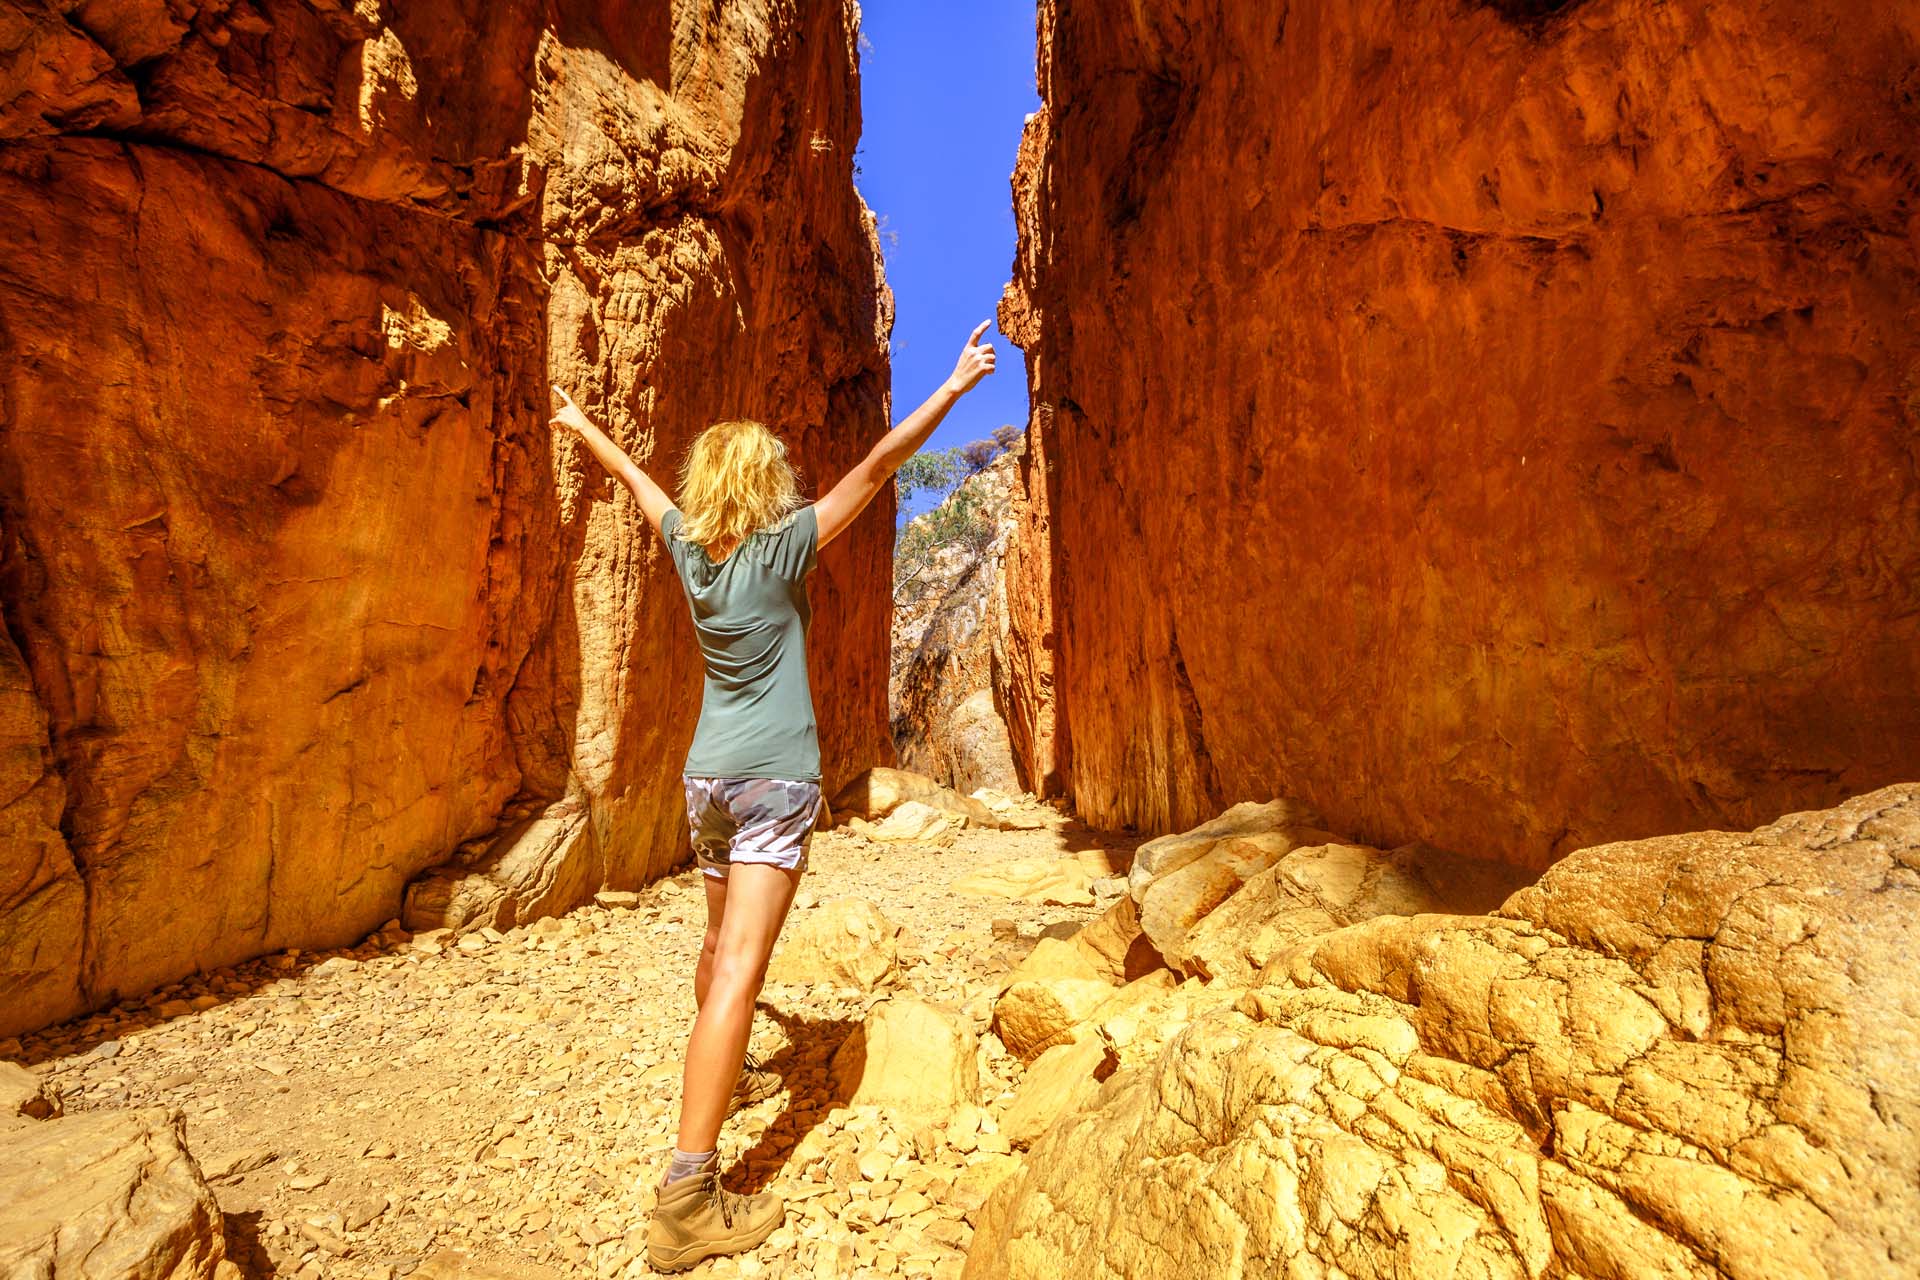 The back of a woman with long blonde hair standing with her arms raised in the middle of a gap between rock cliffs in the Australian desert